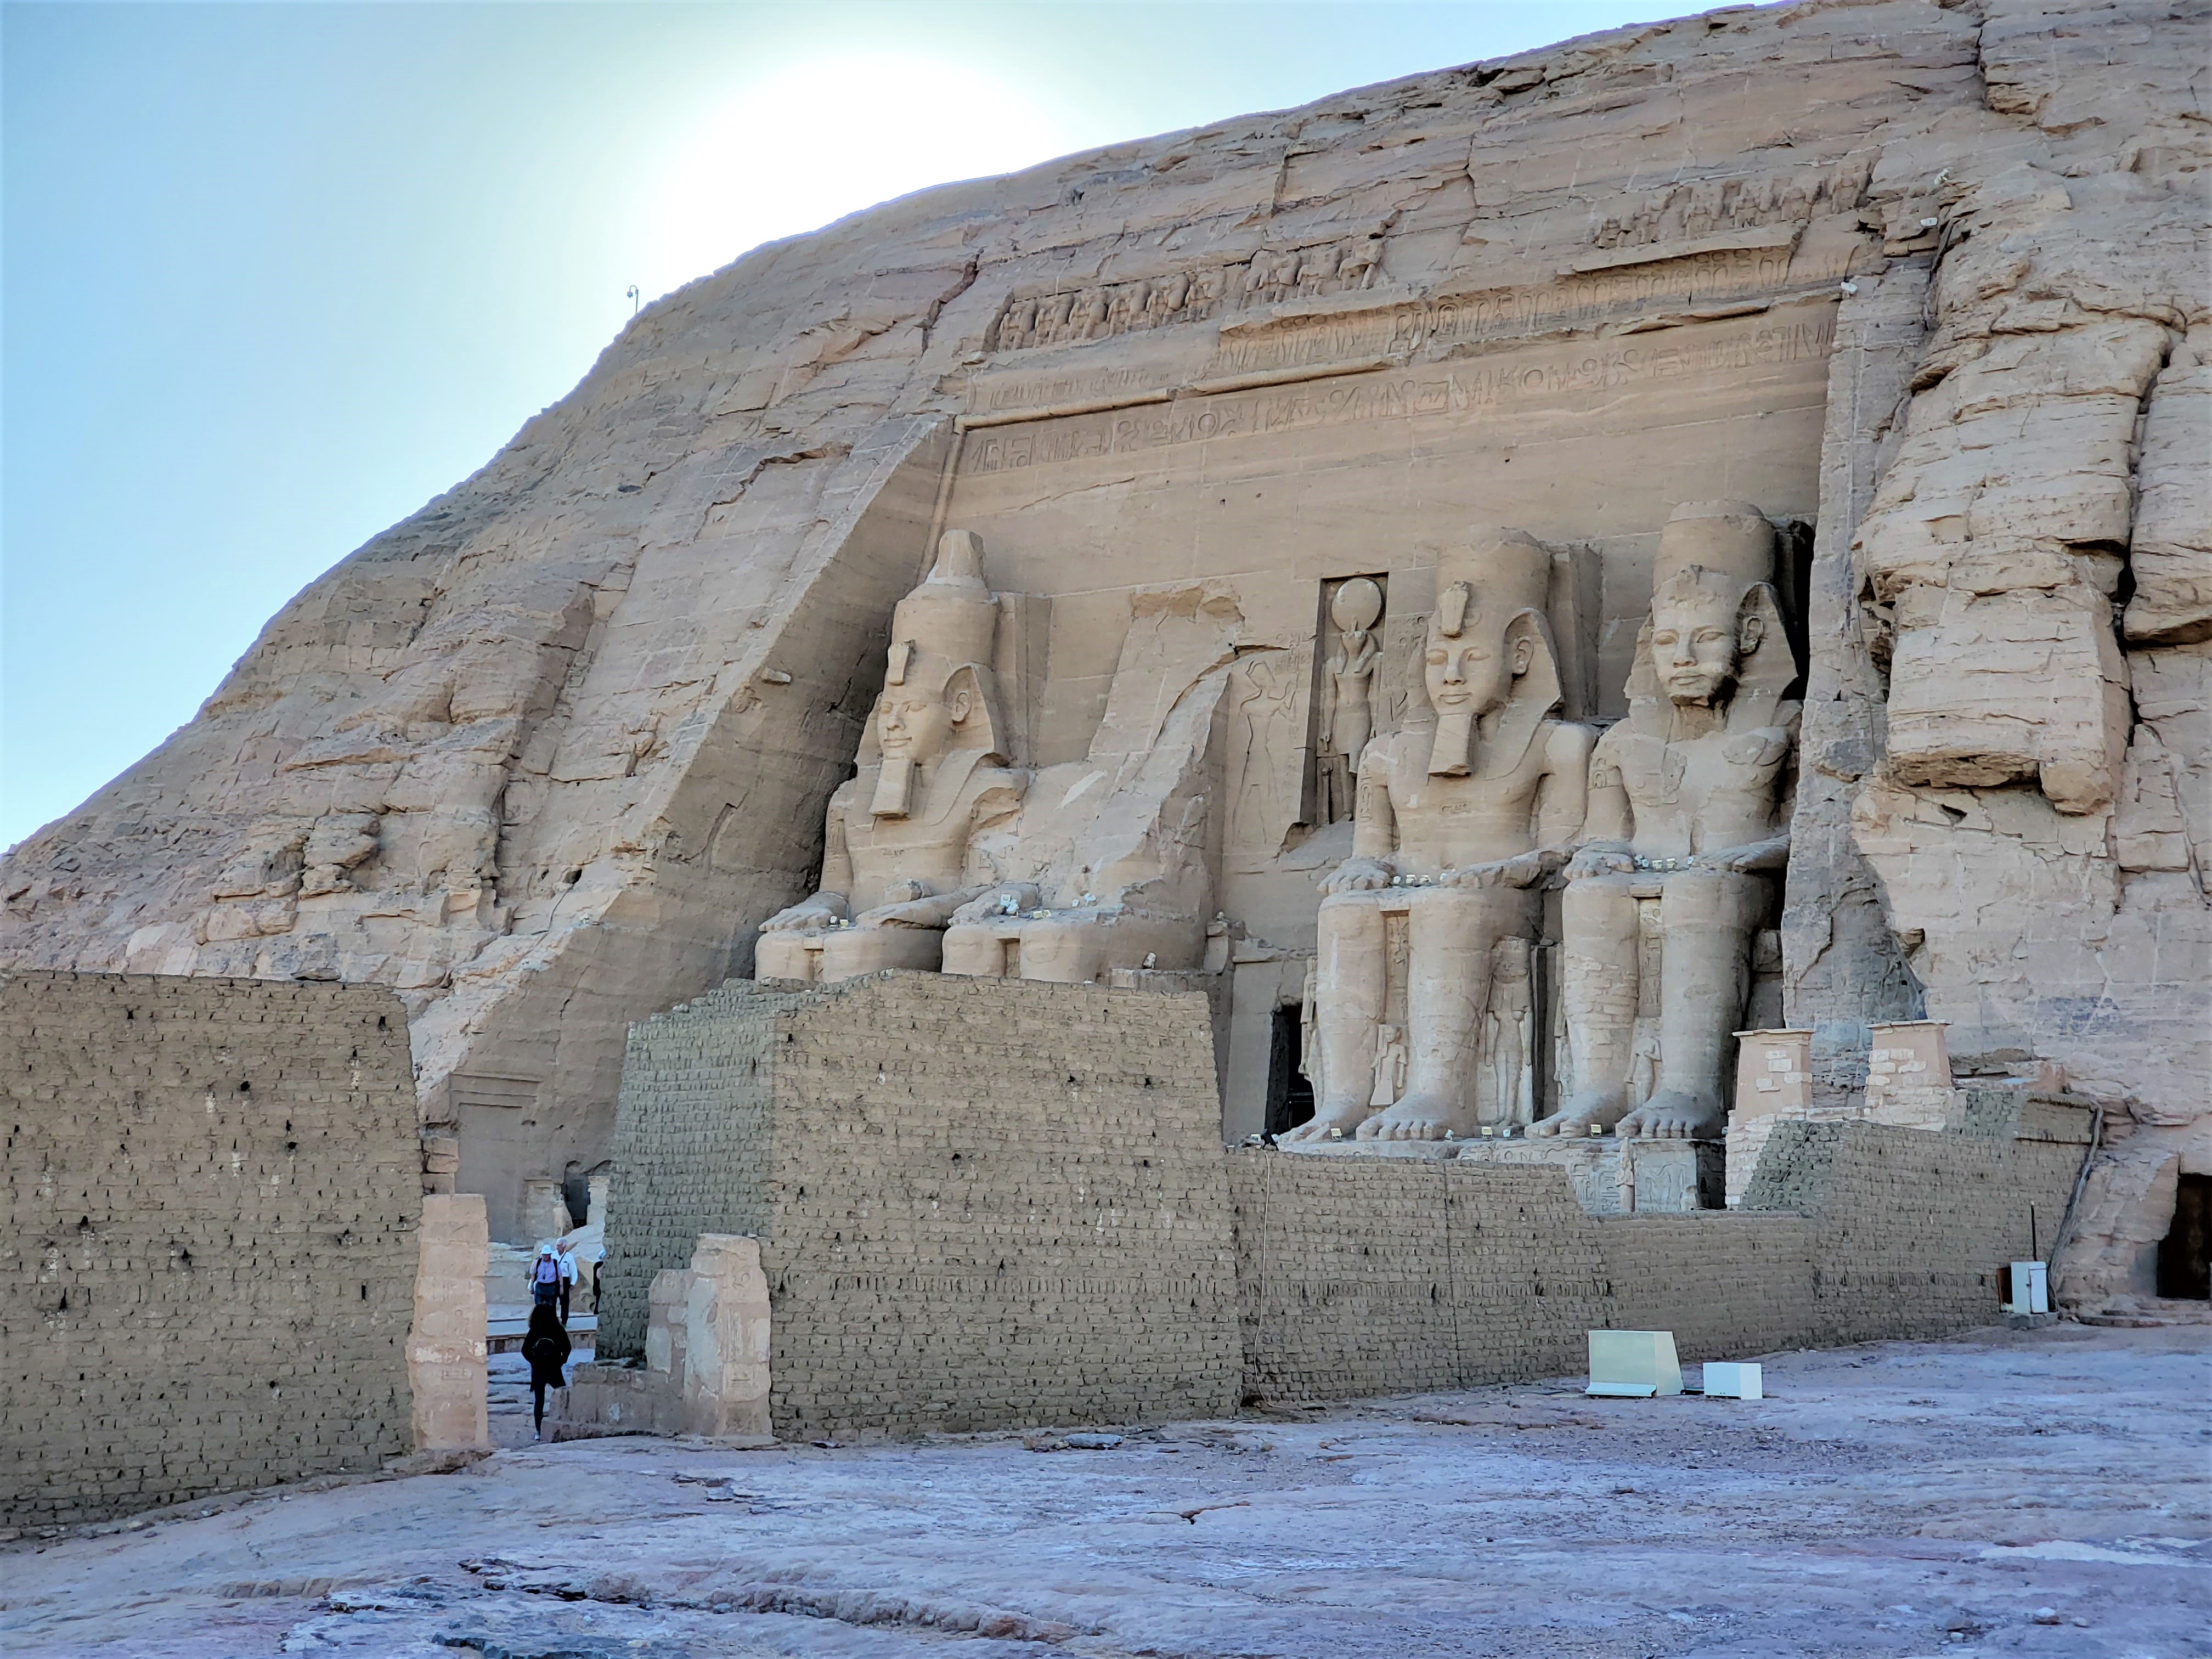 The grand temple of Abu Simbel in Southern Egypt.